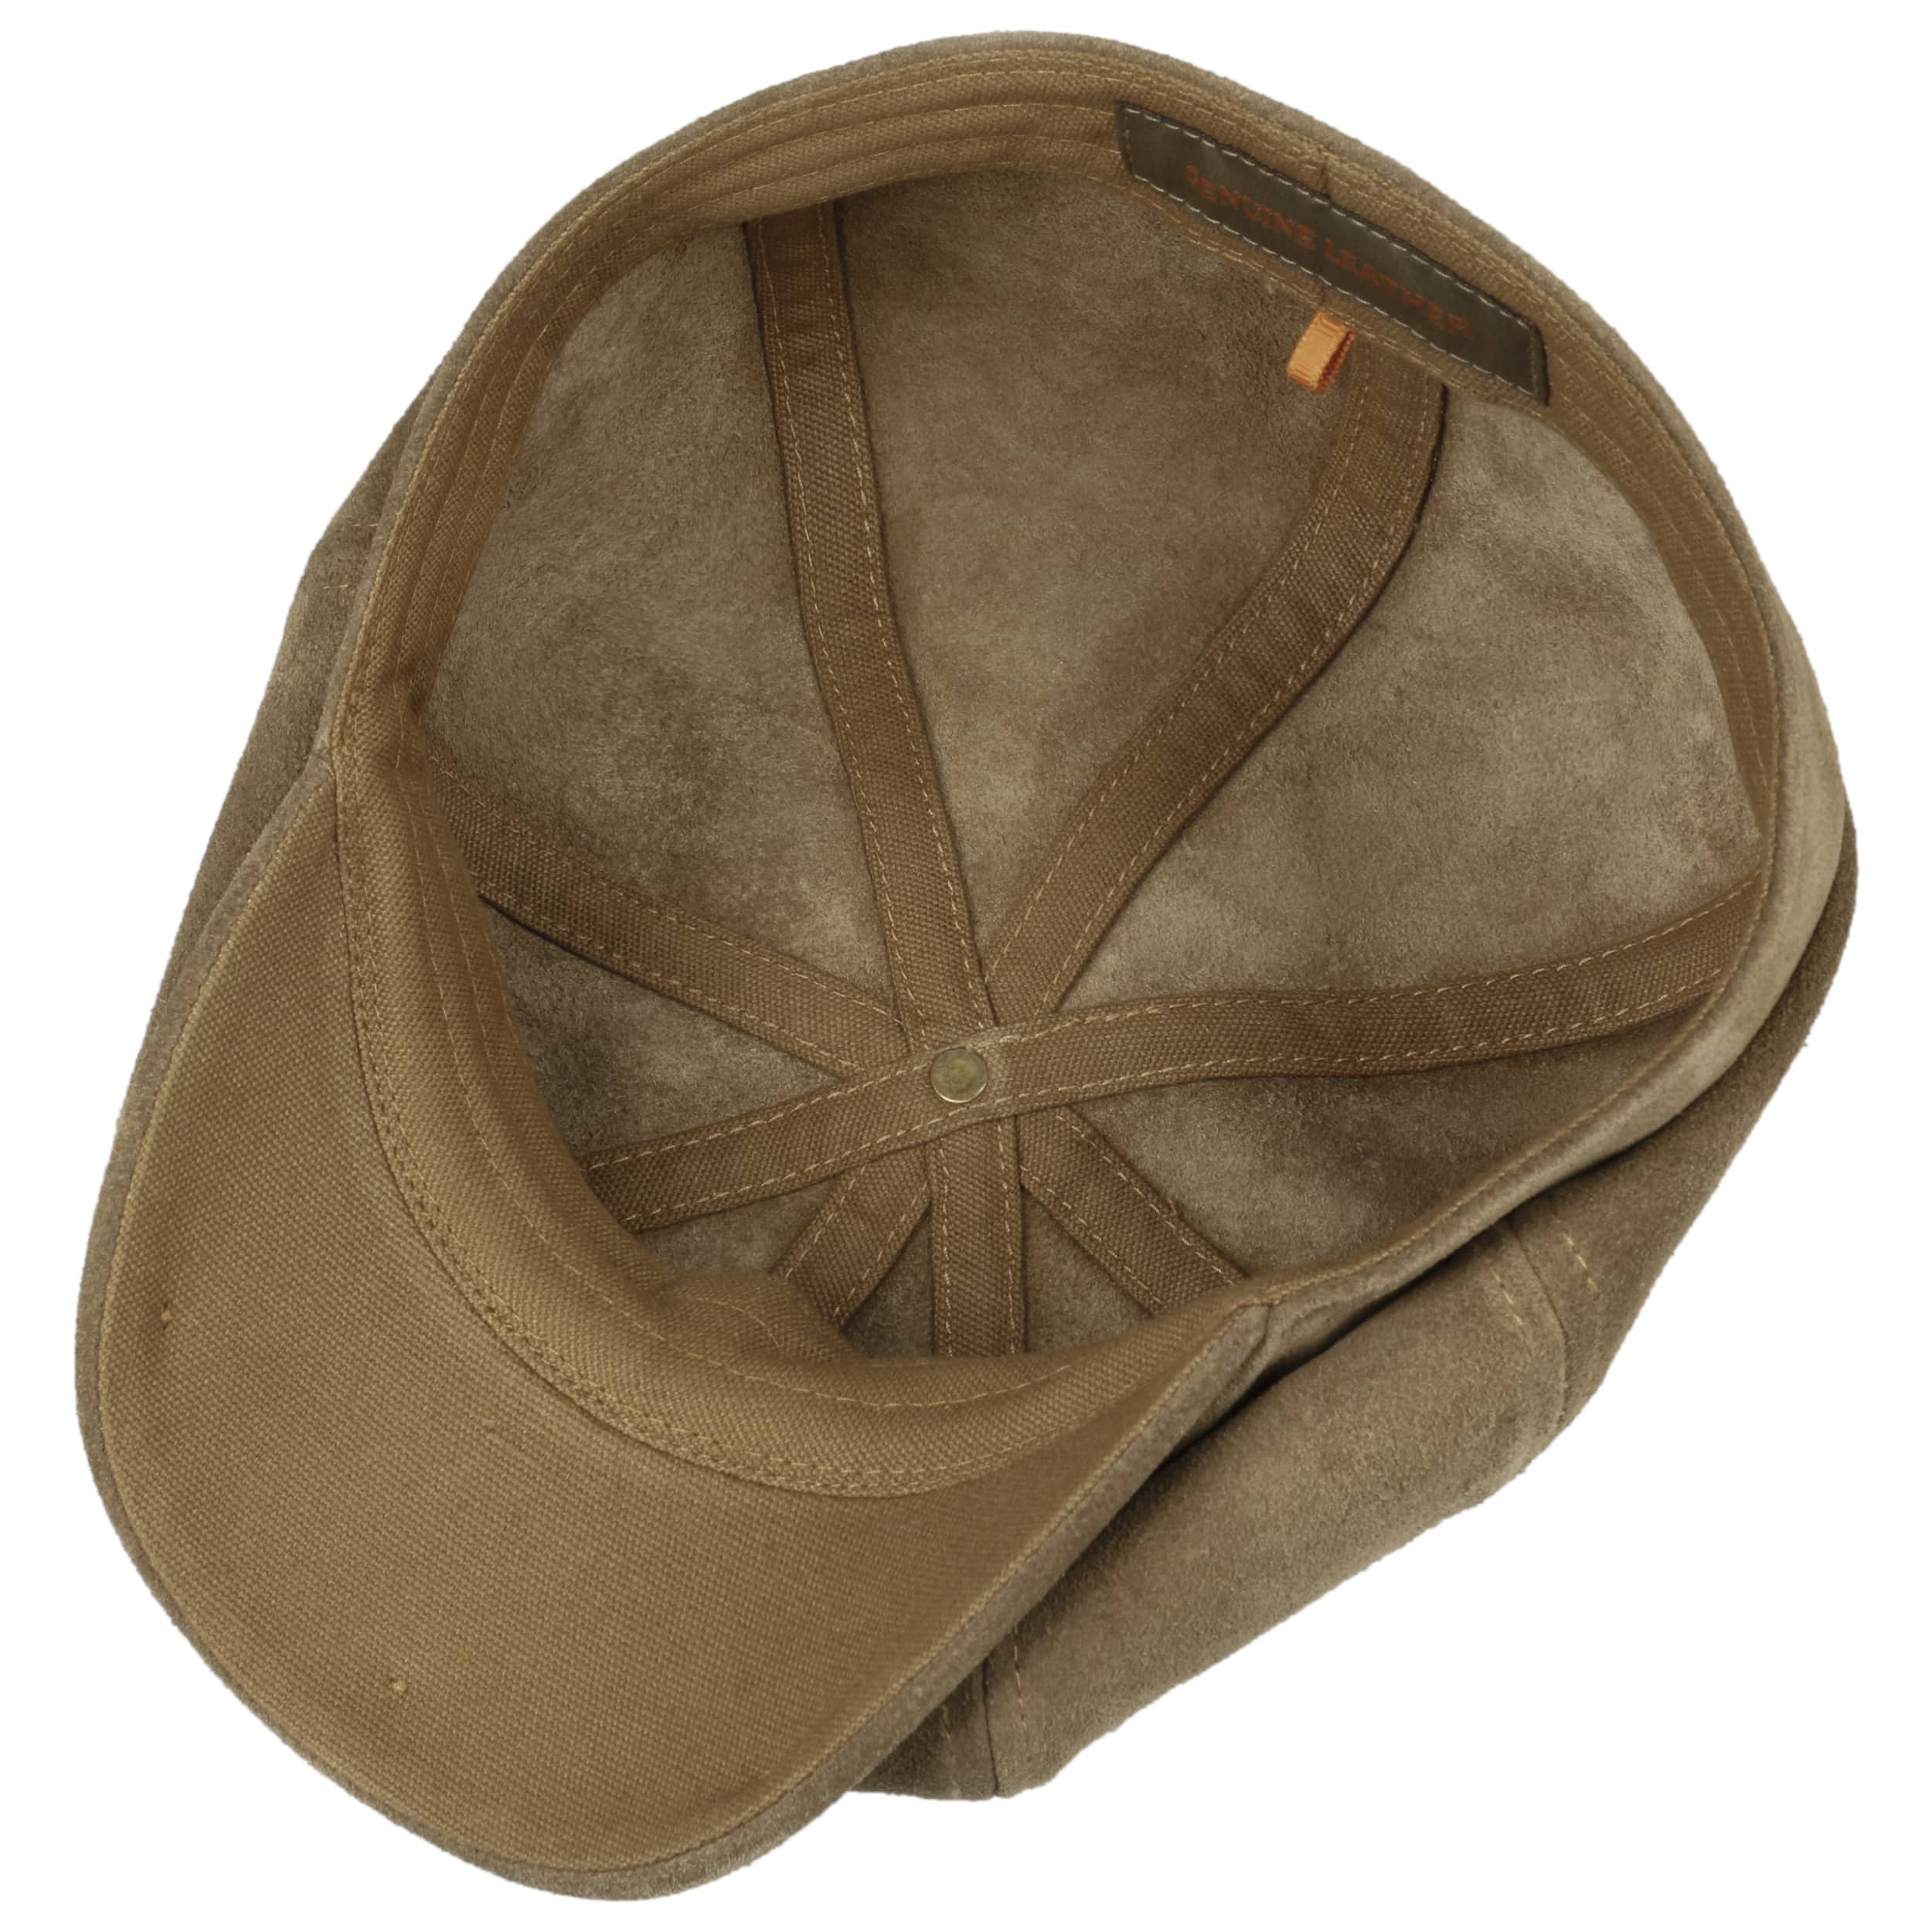 Hatteras Calf Leather Flat Cap by Stetson - 79,00